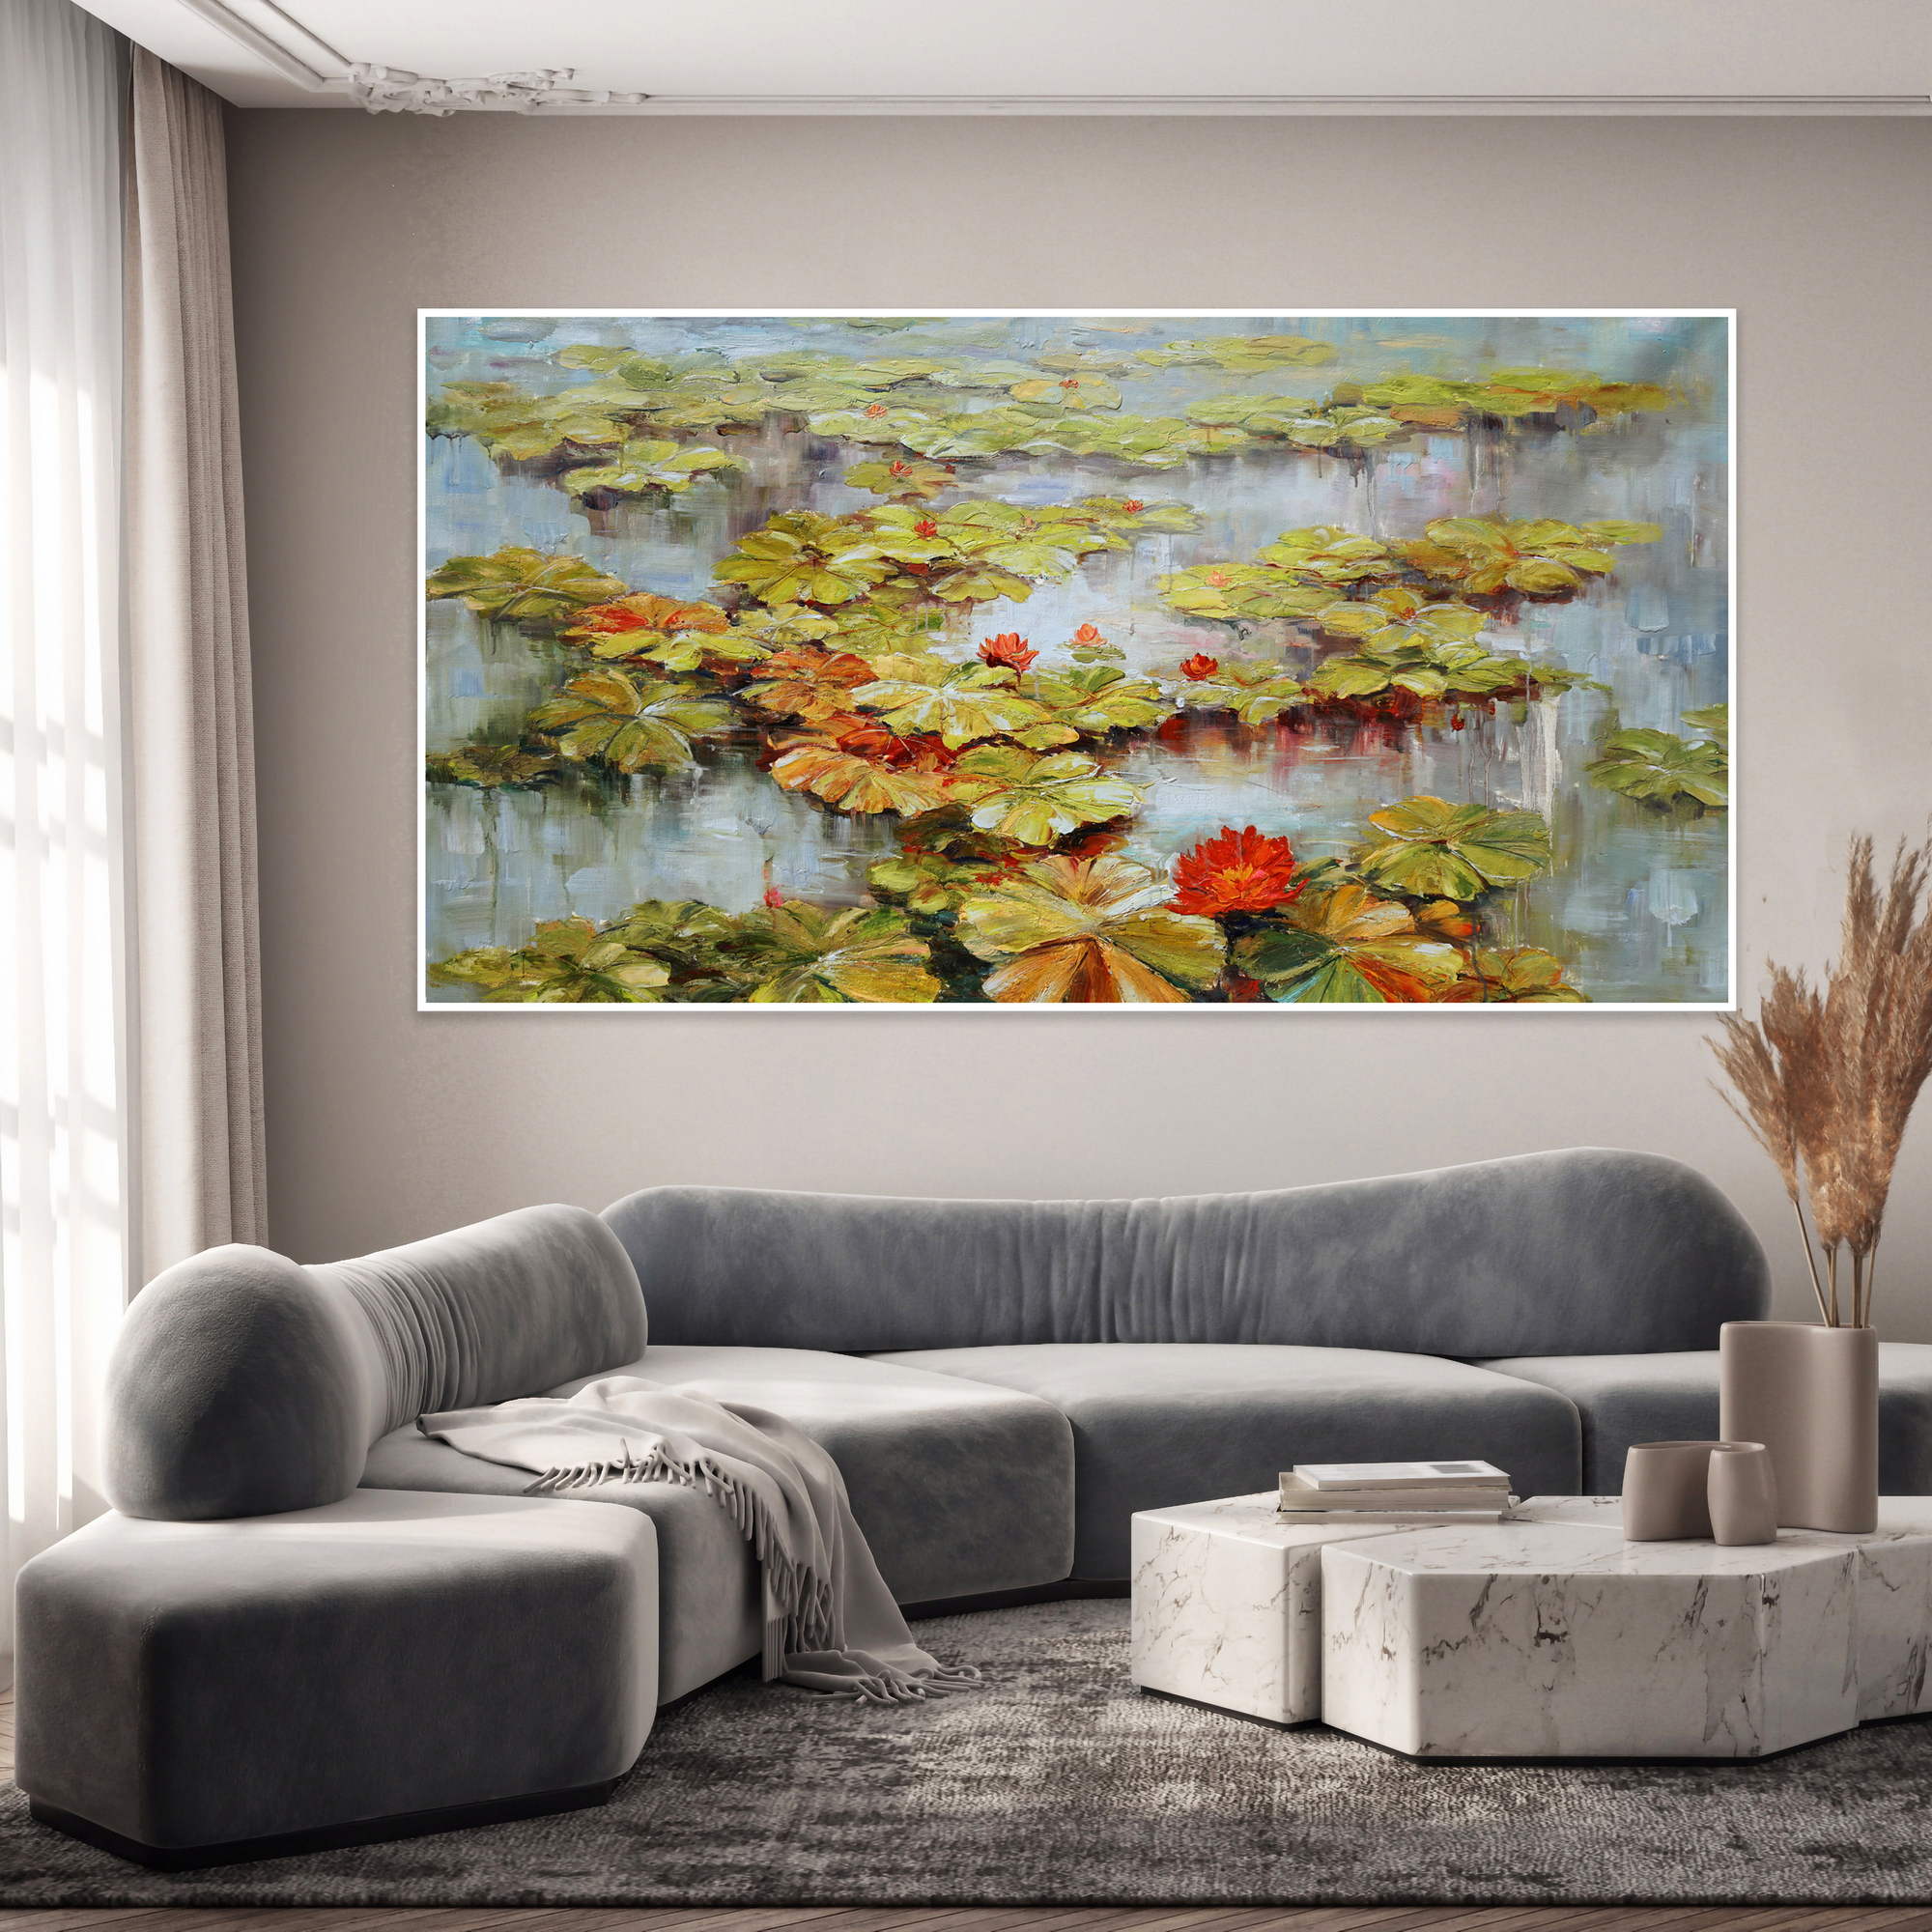 Hand painted Water Lilies on a Mirror of Water 90x180cm